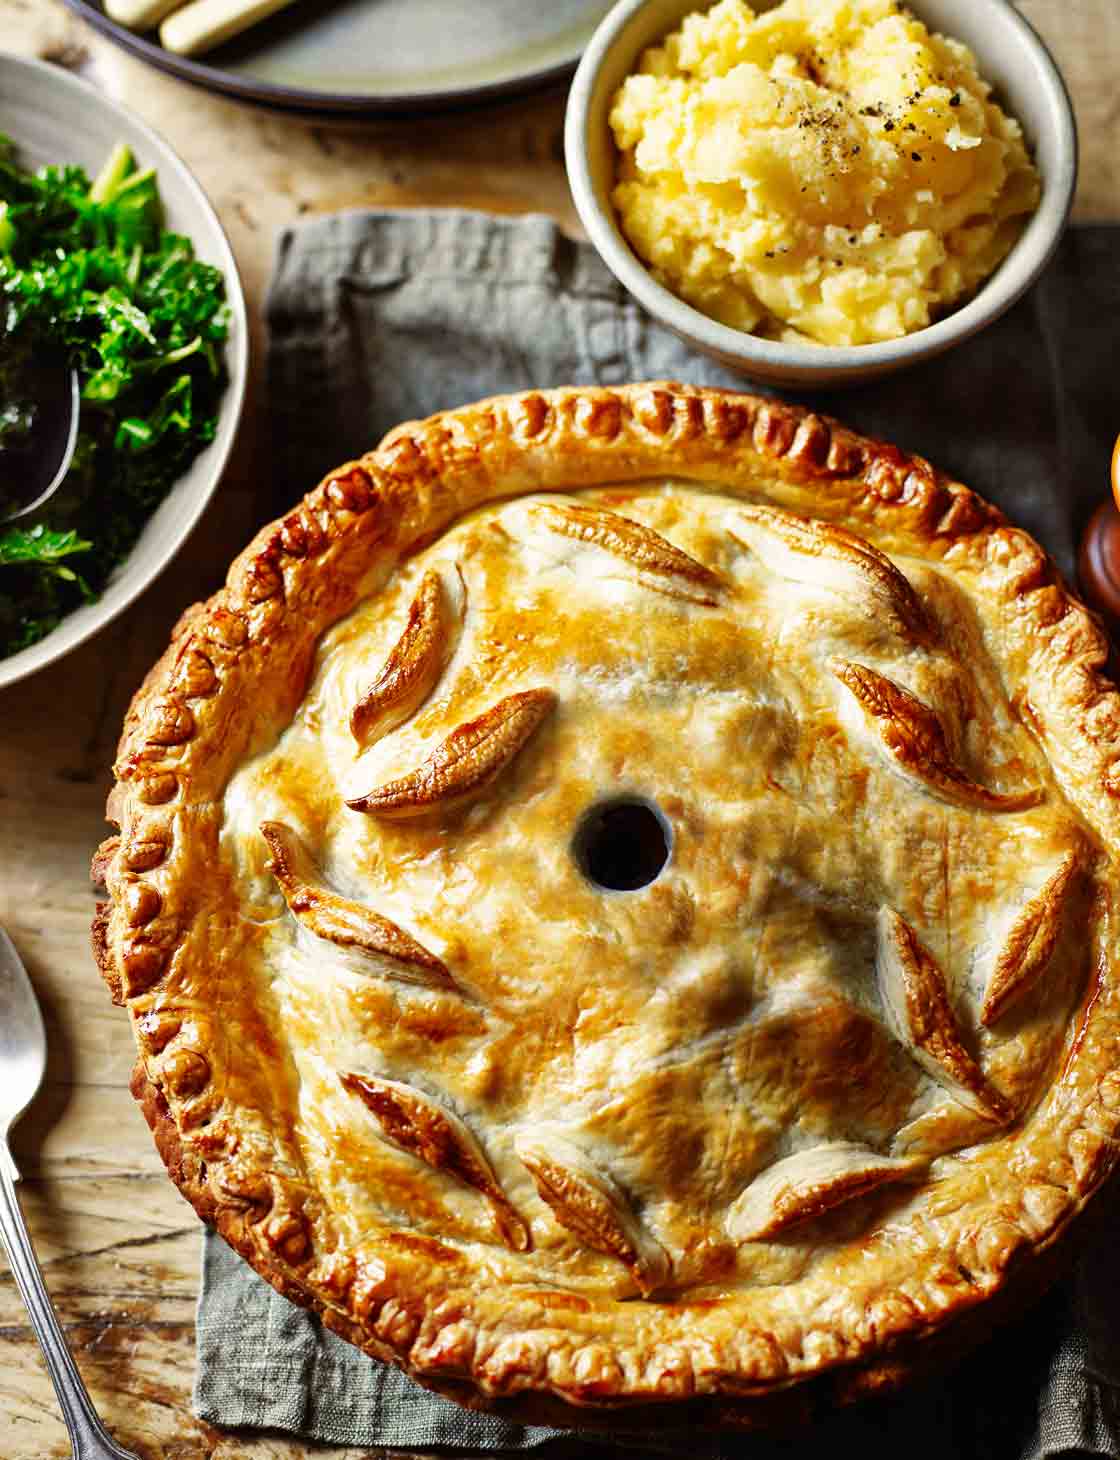 Recipe For Meat And Potato Pie With Suet Crust | Dandk ...